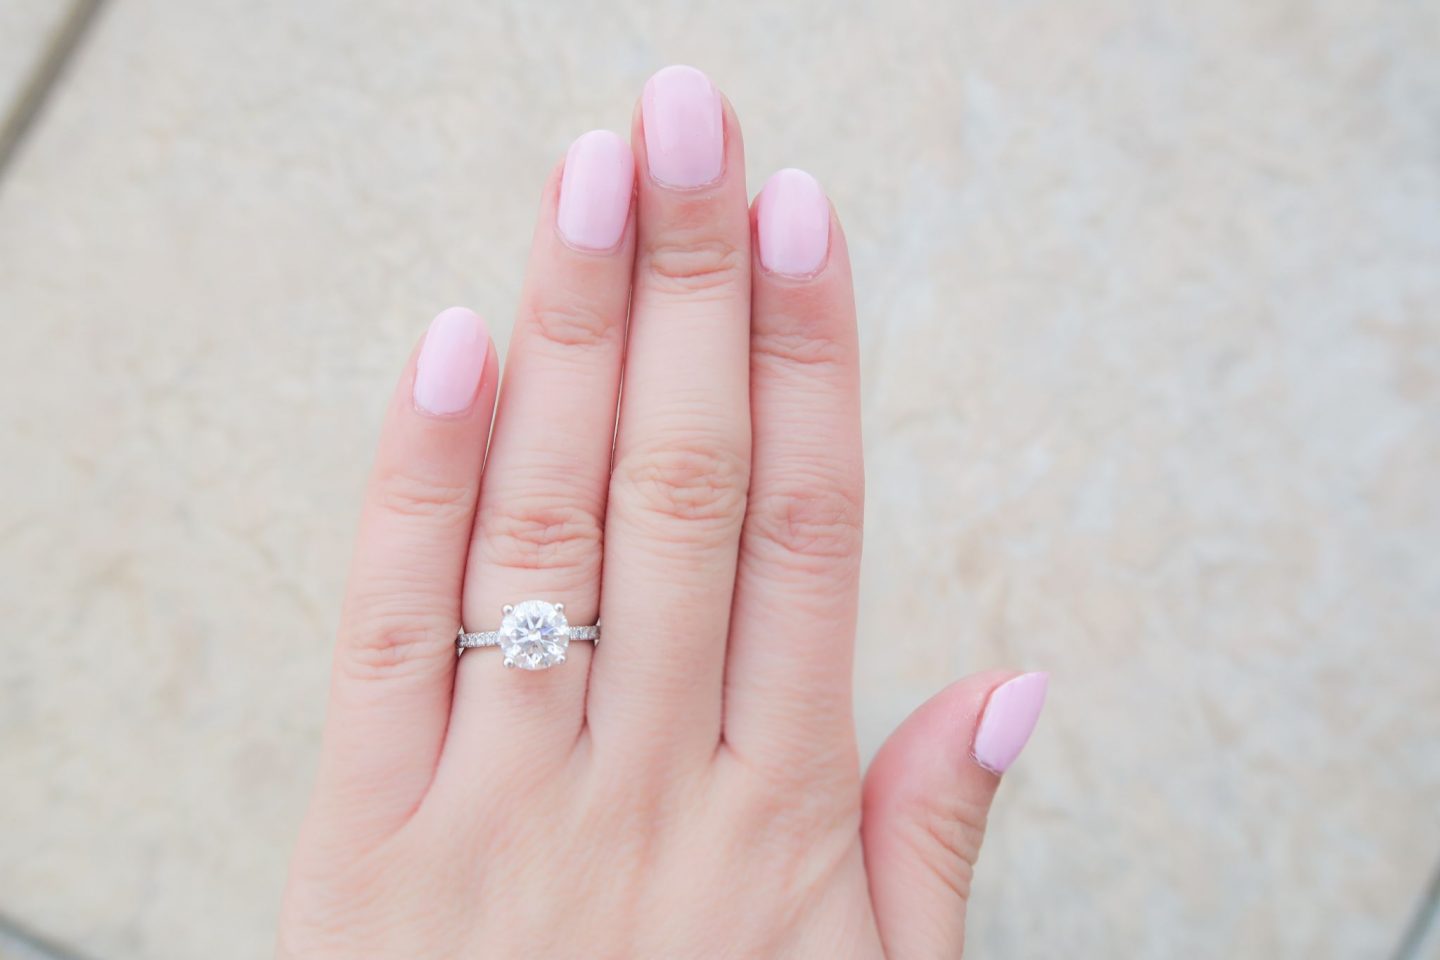 9. Engagement Picture Nail Inspiration - wide 5